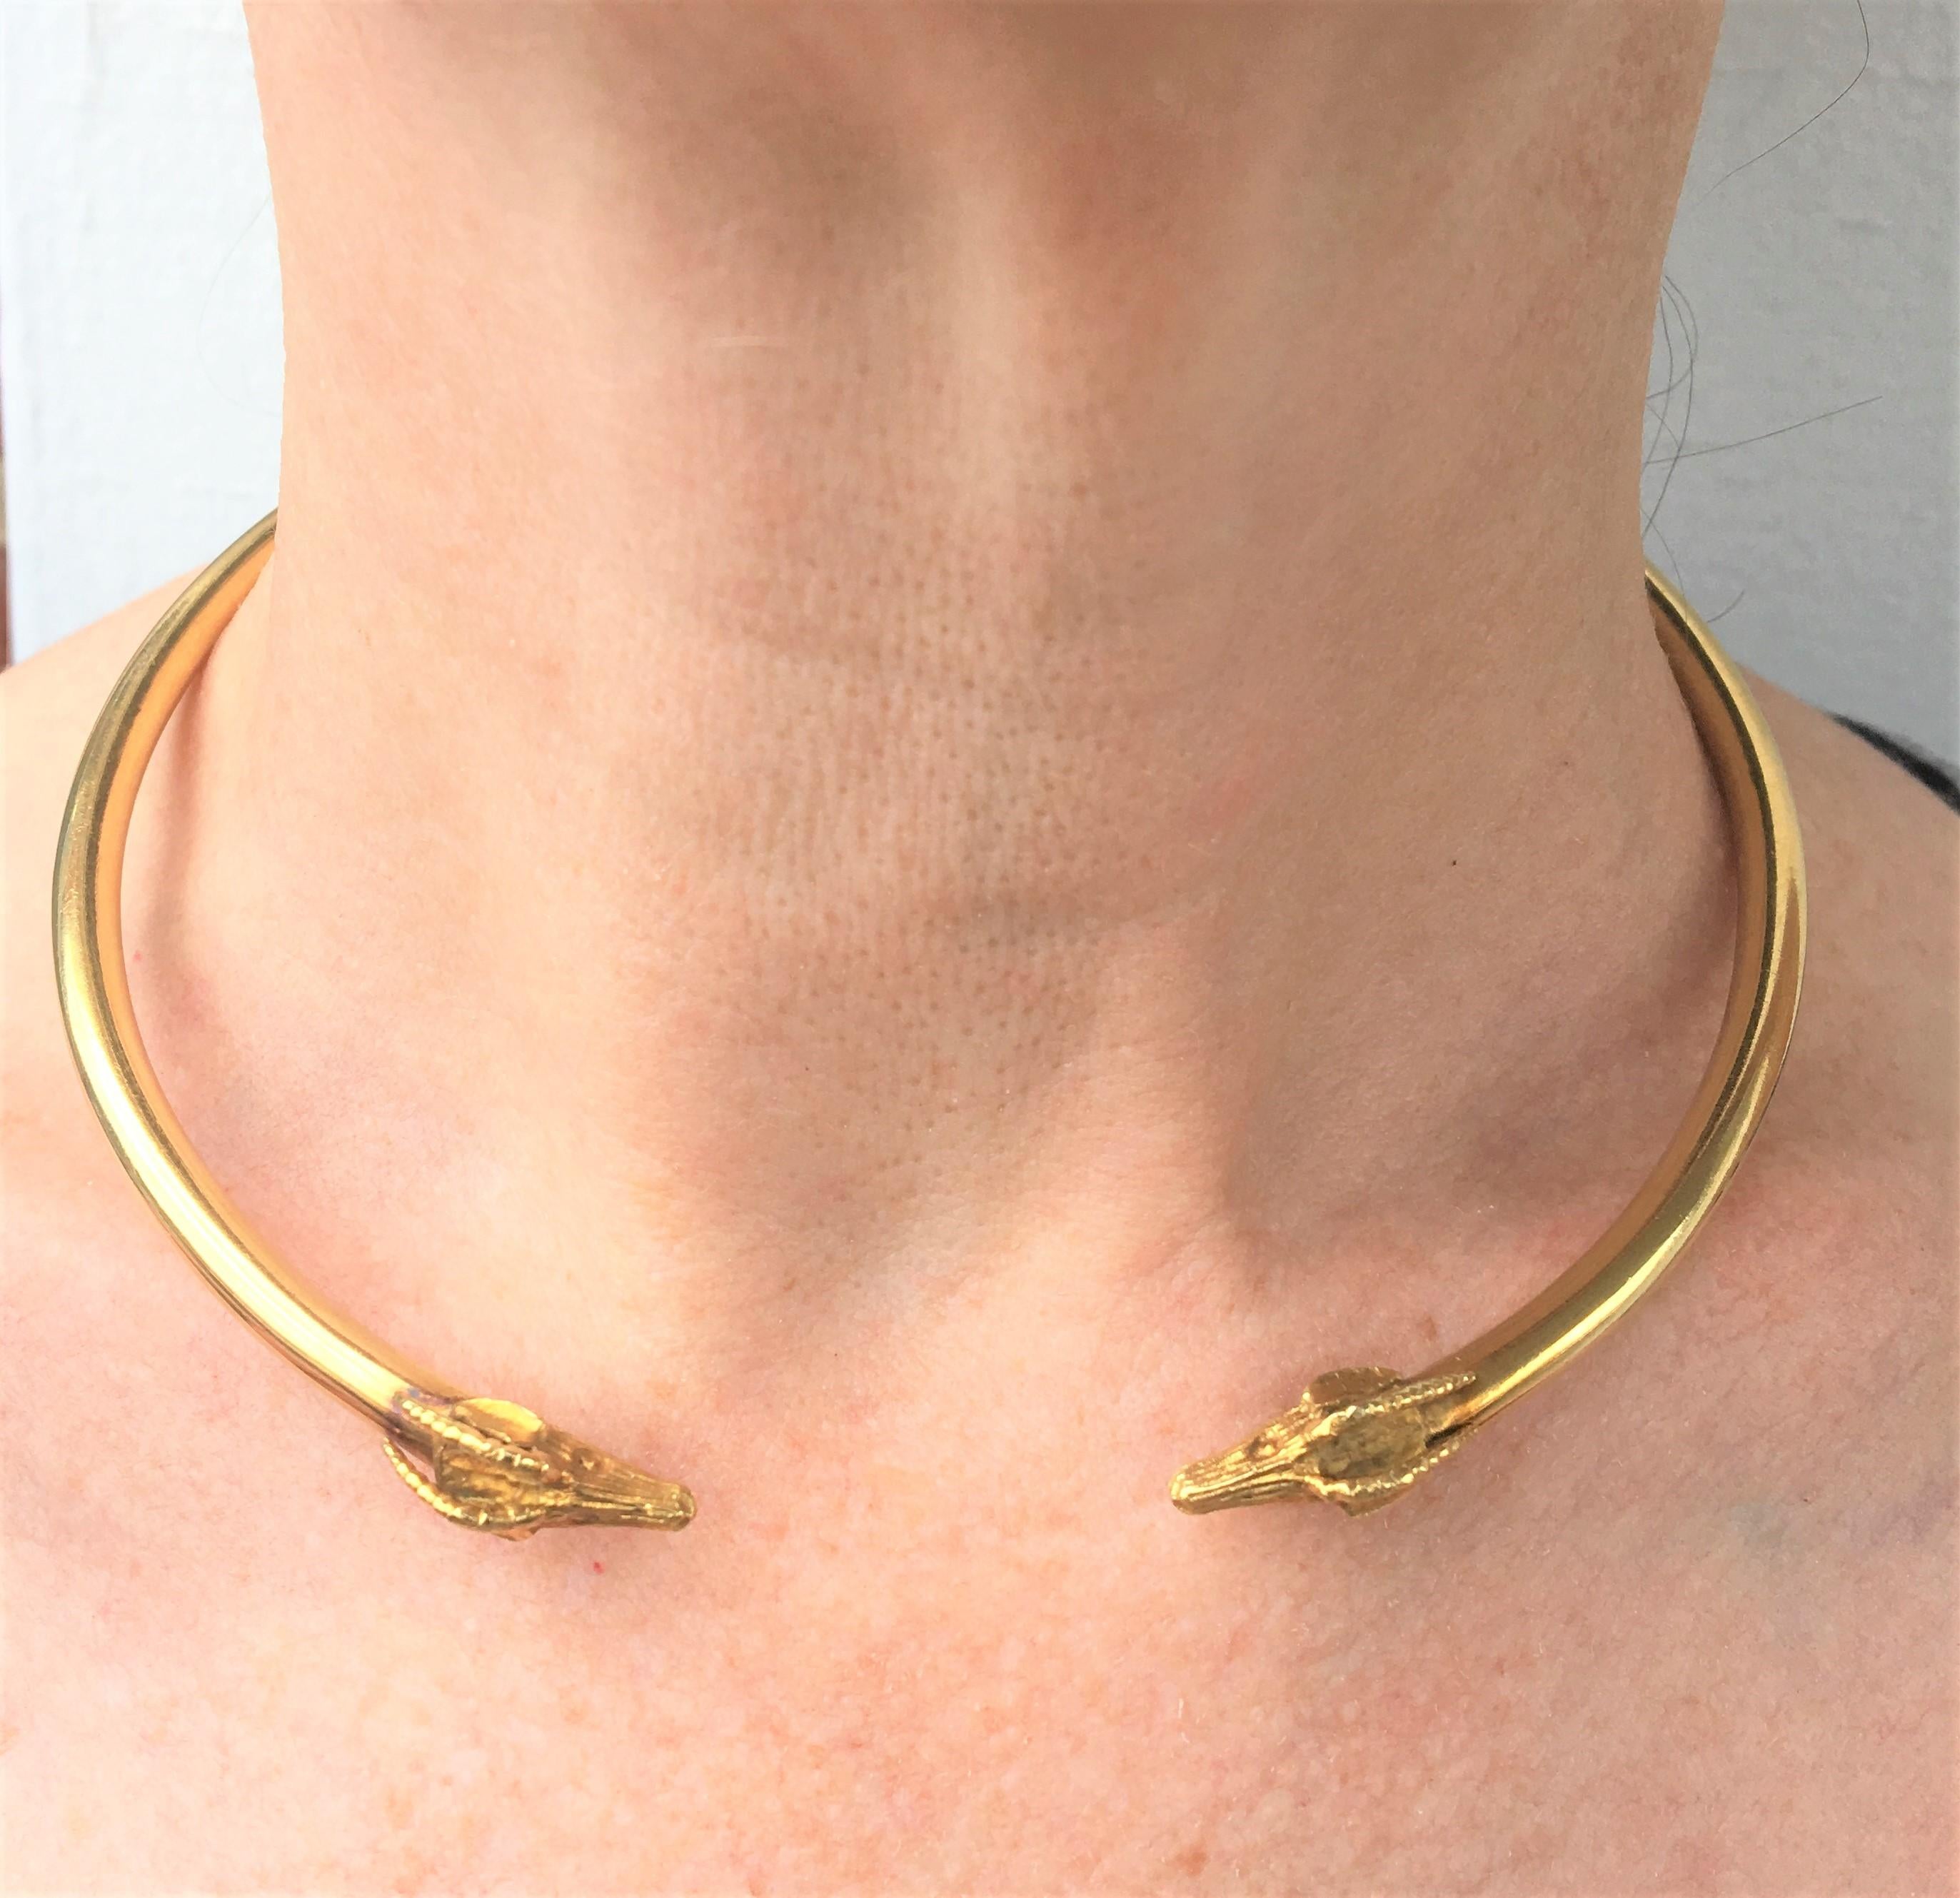 Estate Ram Head Collar Necklace
18K Yellow Gold
Ram Head at each opening of collar
Collar itself is approximately 4.5mm thick
Twists to open enough to put around neck
Choker length
Approximately 4.5-inch diameter, approximately 14,25 inches inside